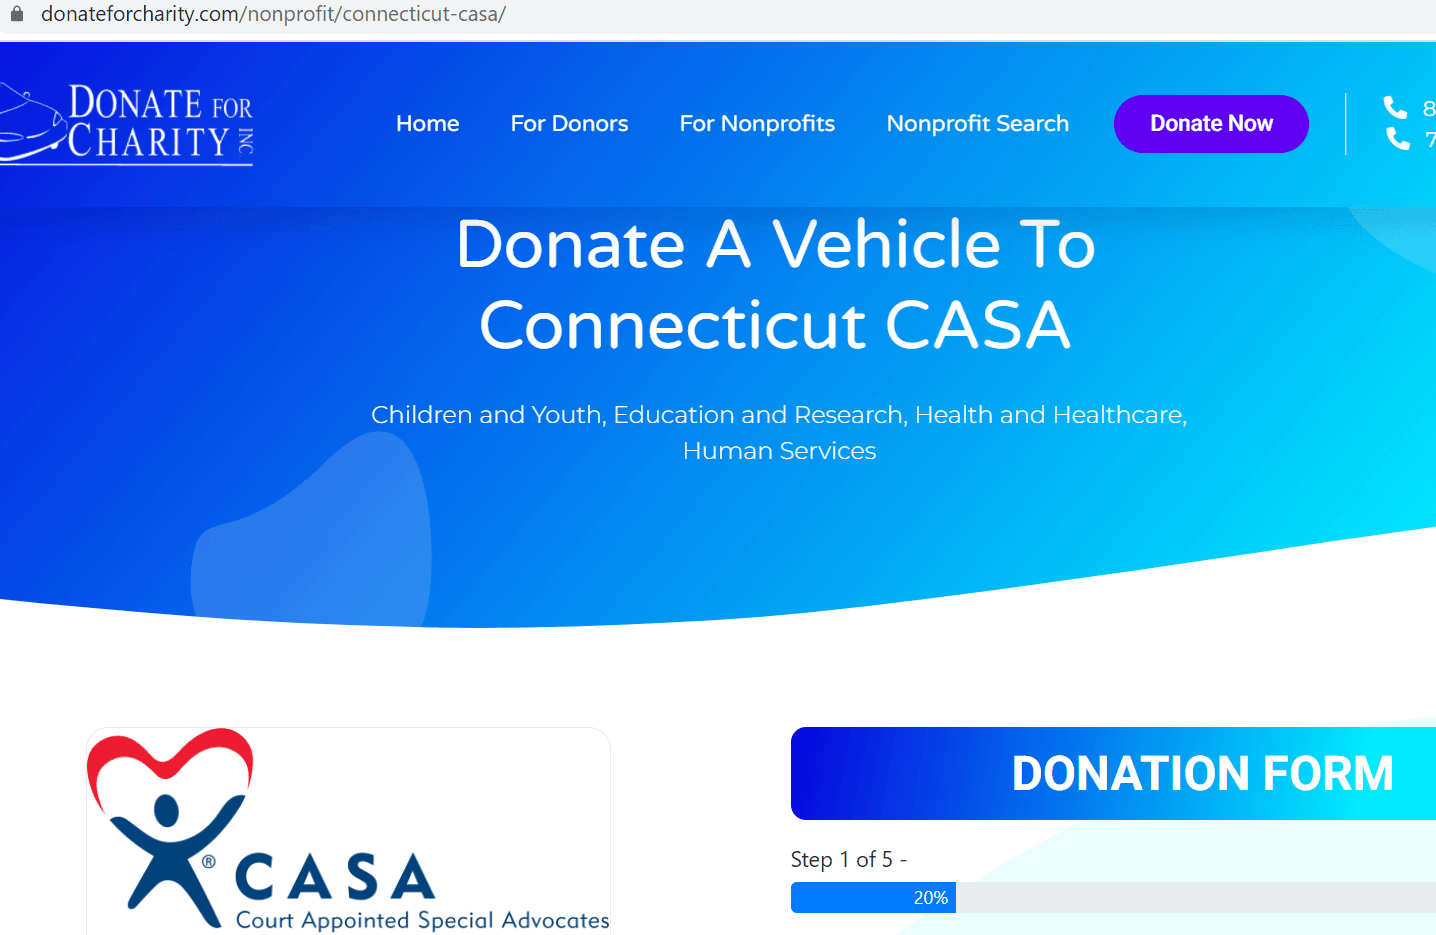 You can donate your vehicle to benefit Connecticut CASA, and receive a tax deduction!